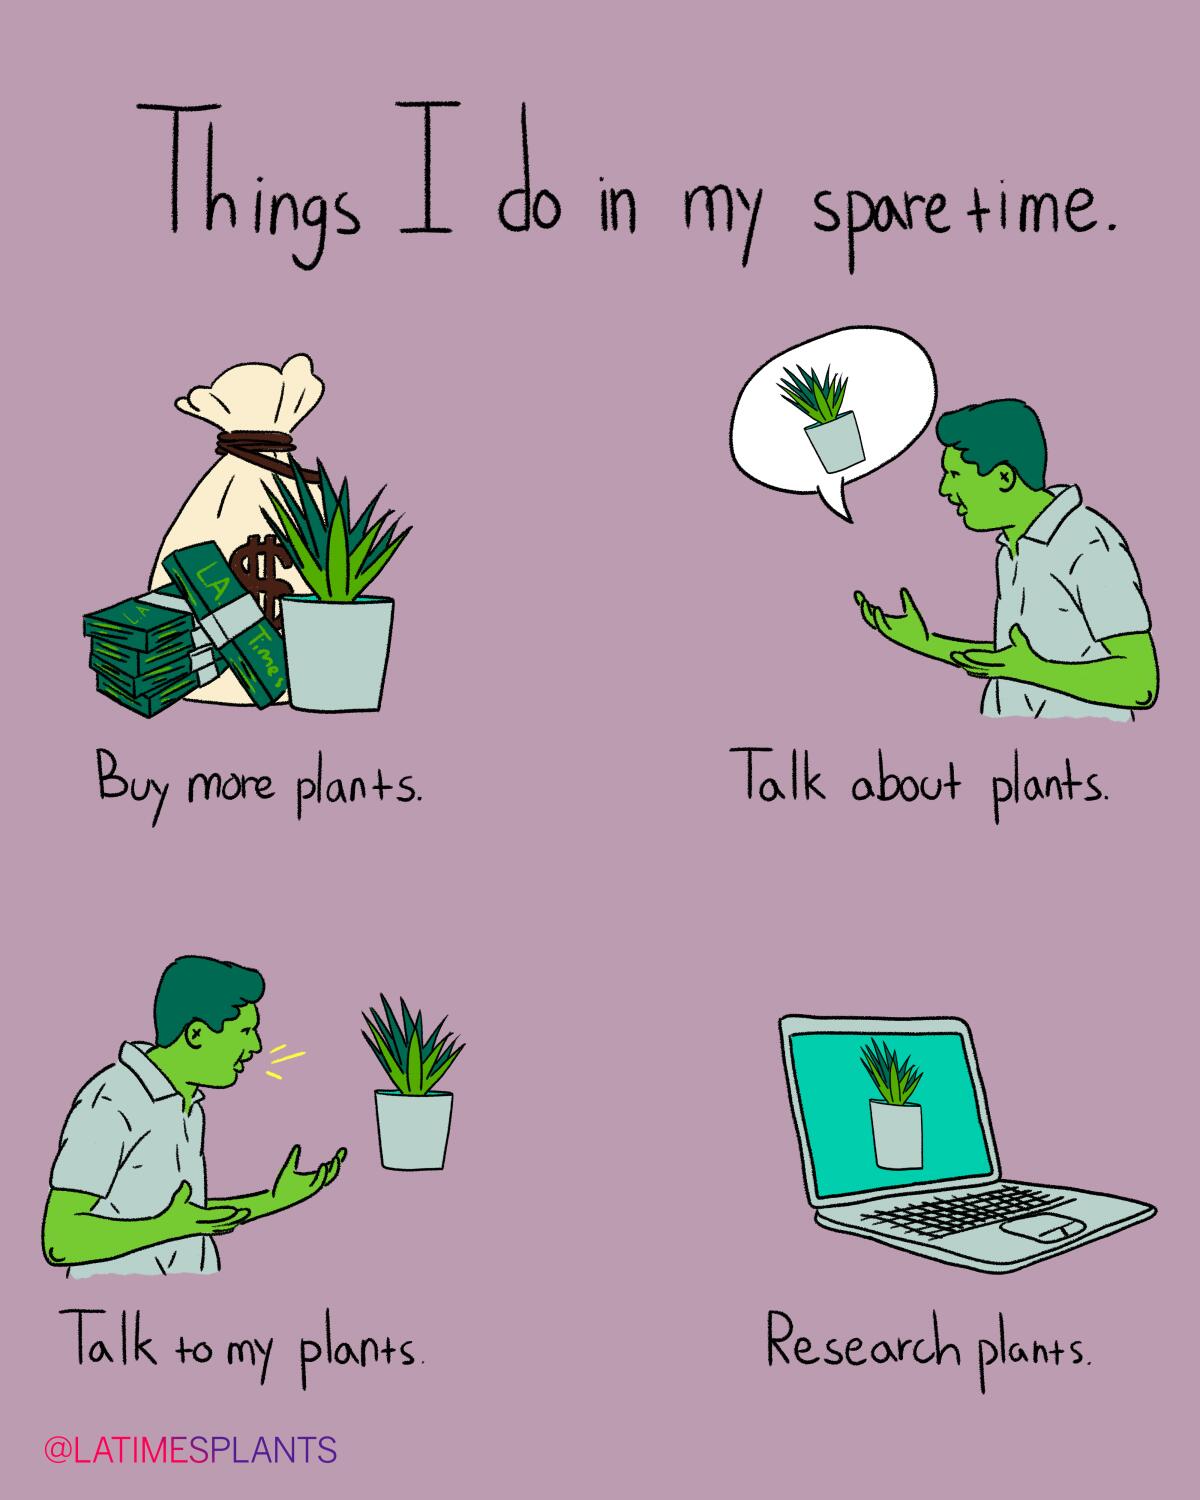 Things plant lovers do in their sparetime.